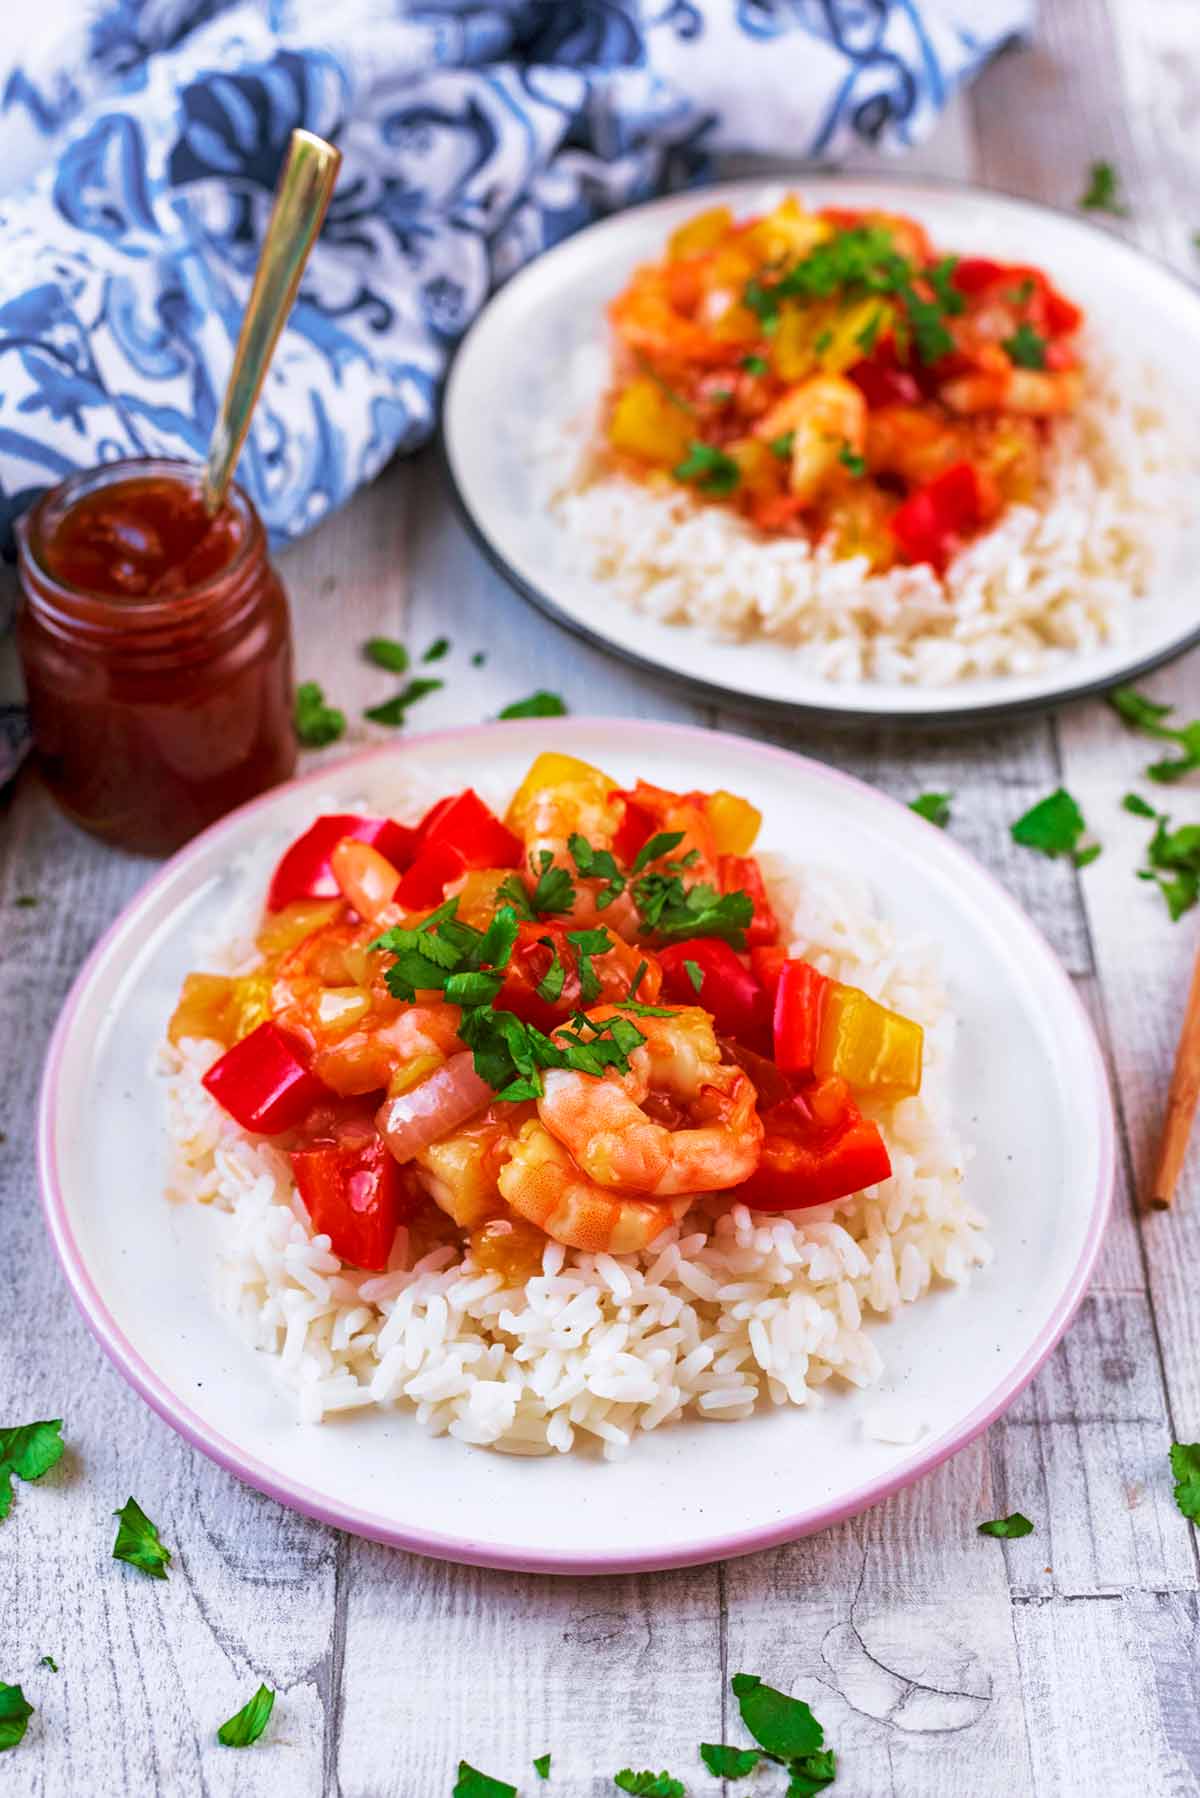 Prawns (shrimp) in a sauce on top of rice next to a small jar of sauce.